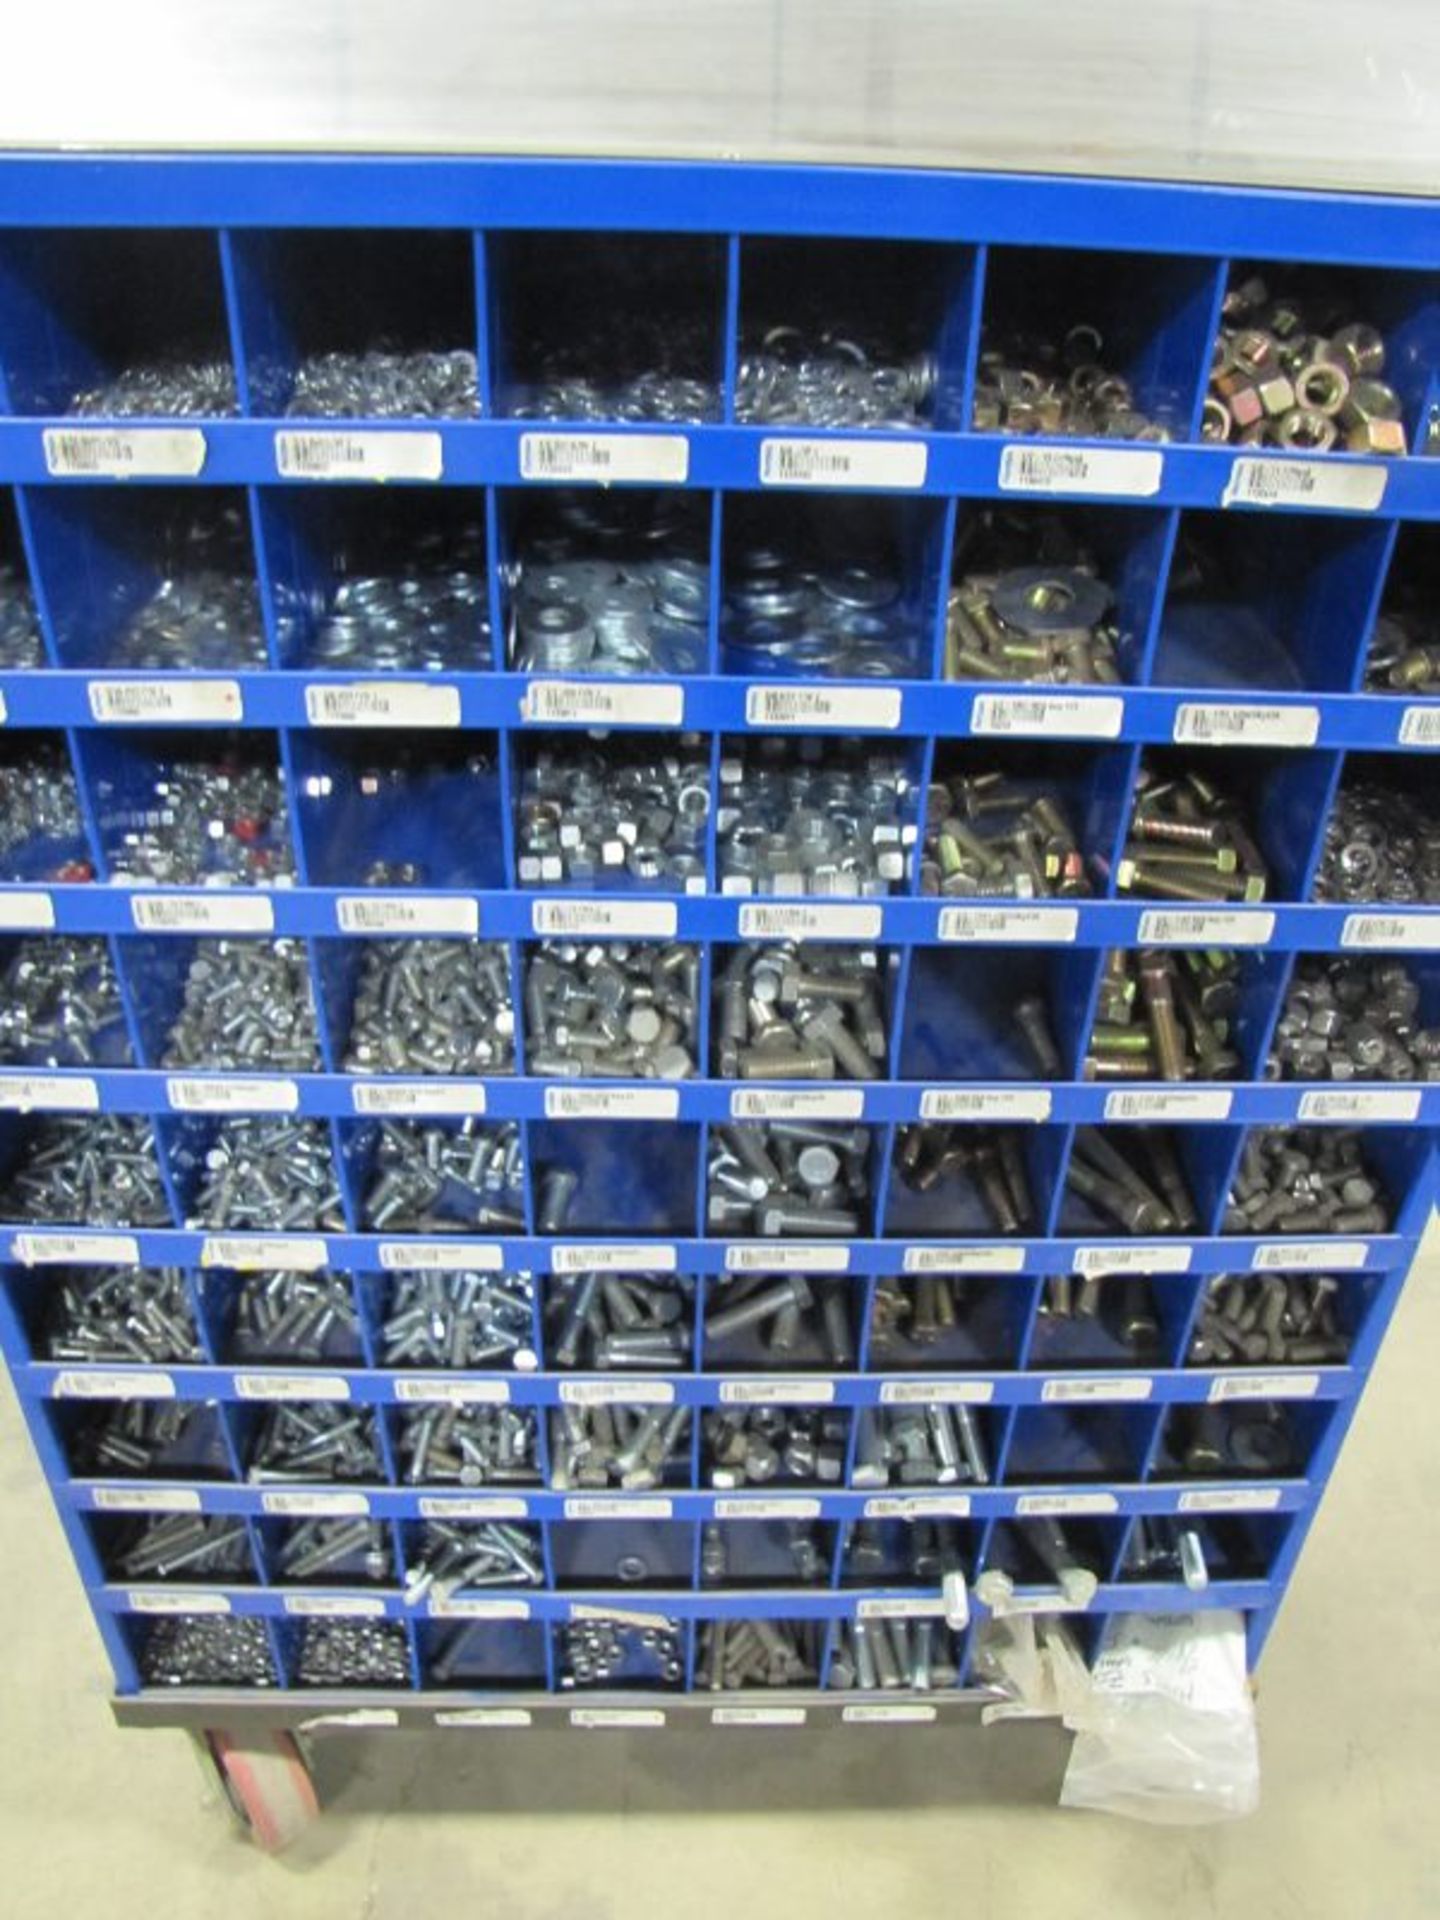 Fastenal Portable Rolling Bin with Split Washers, Flat Washers, Nuts and Bolts as Shown - Image 4 of 4